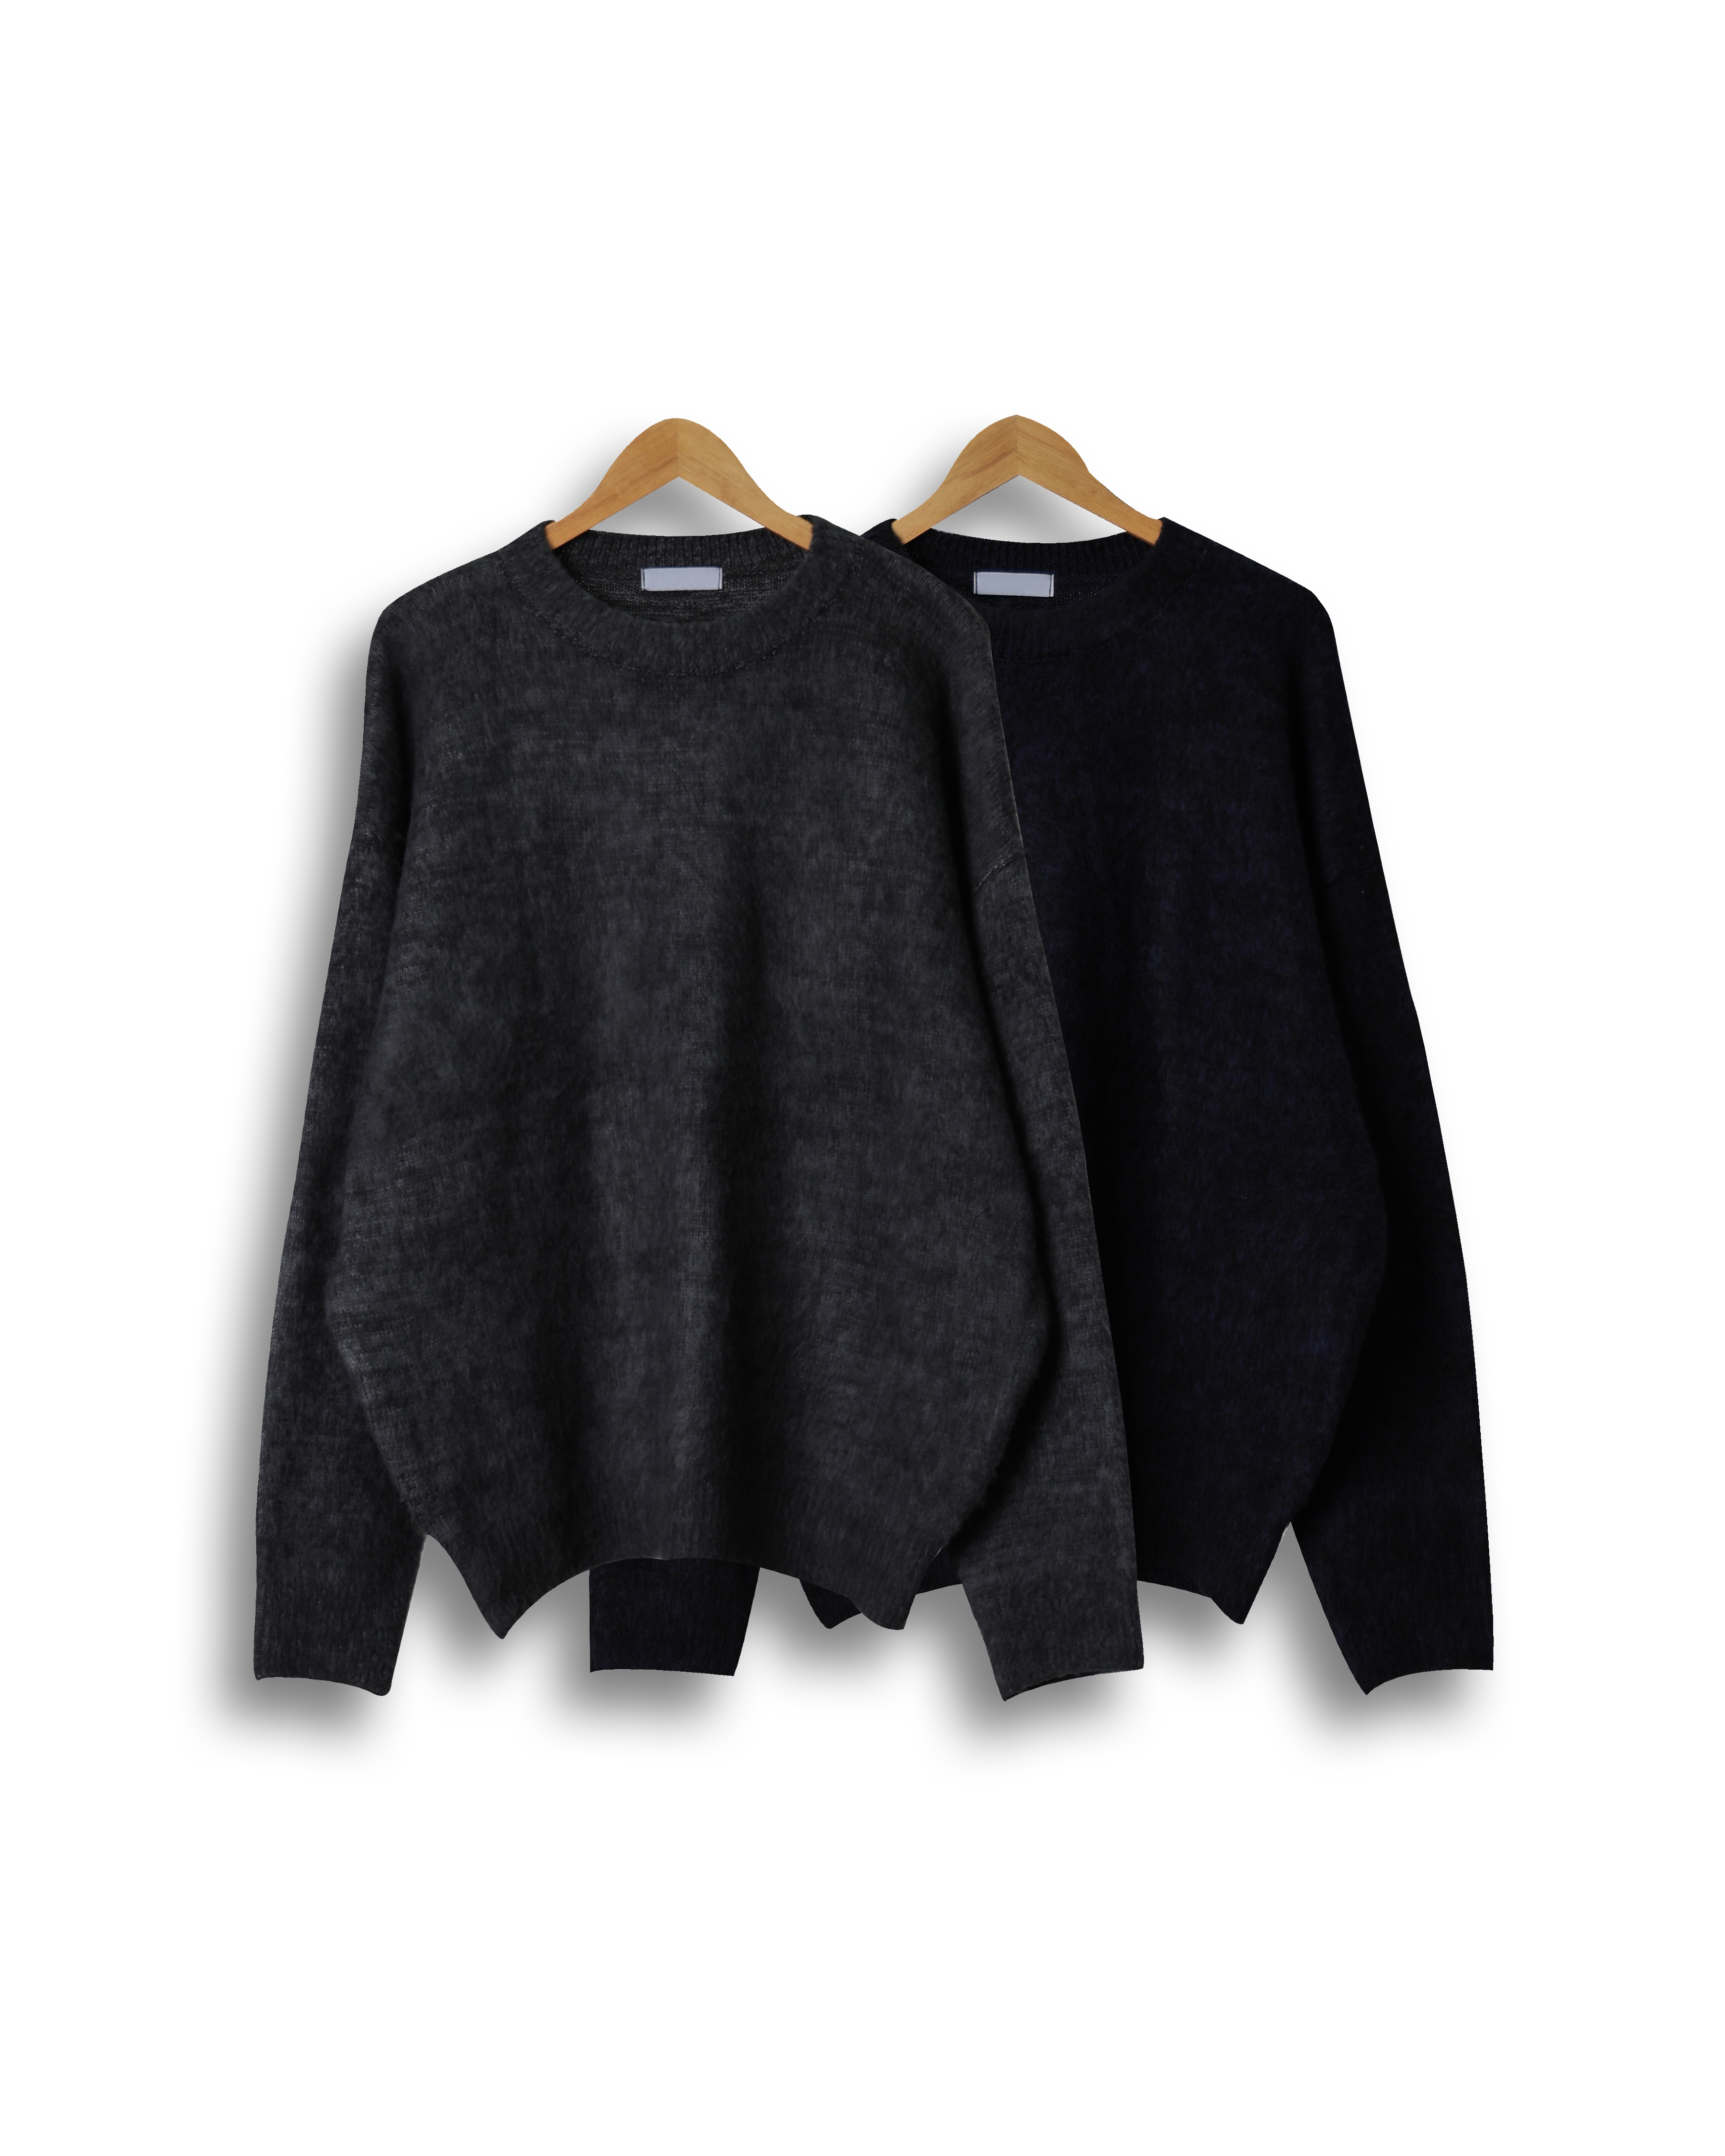 CONS Buckle Mohair Oversized Knit (Charcoal/Navy)